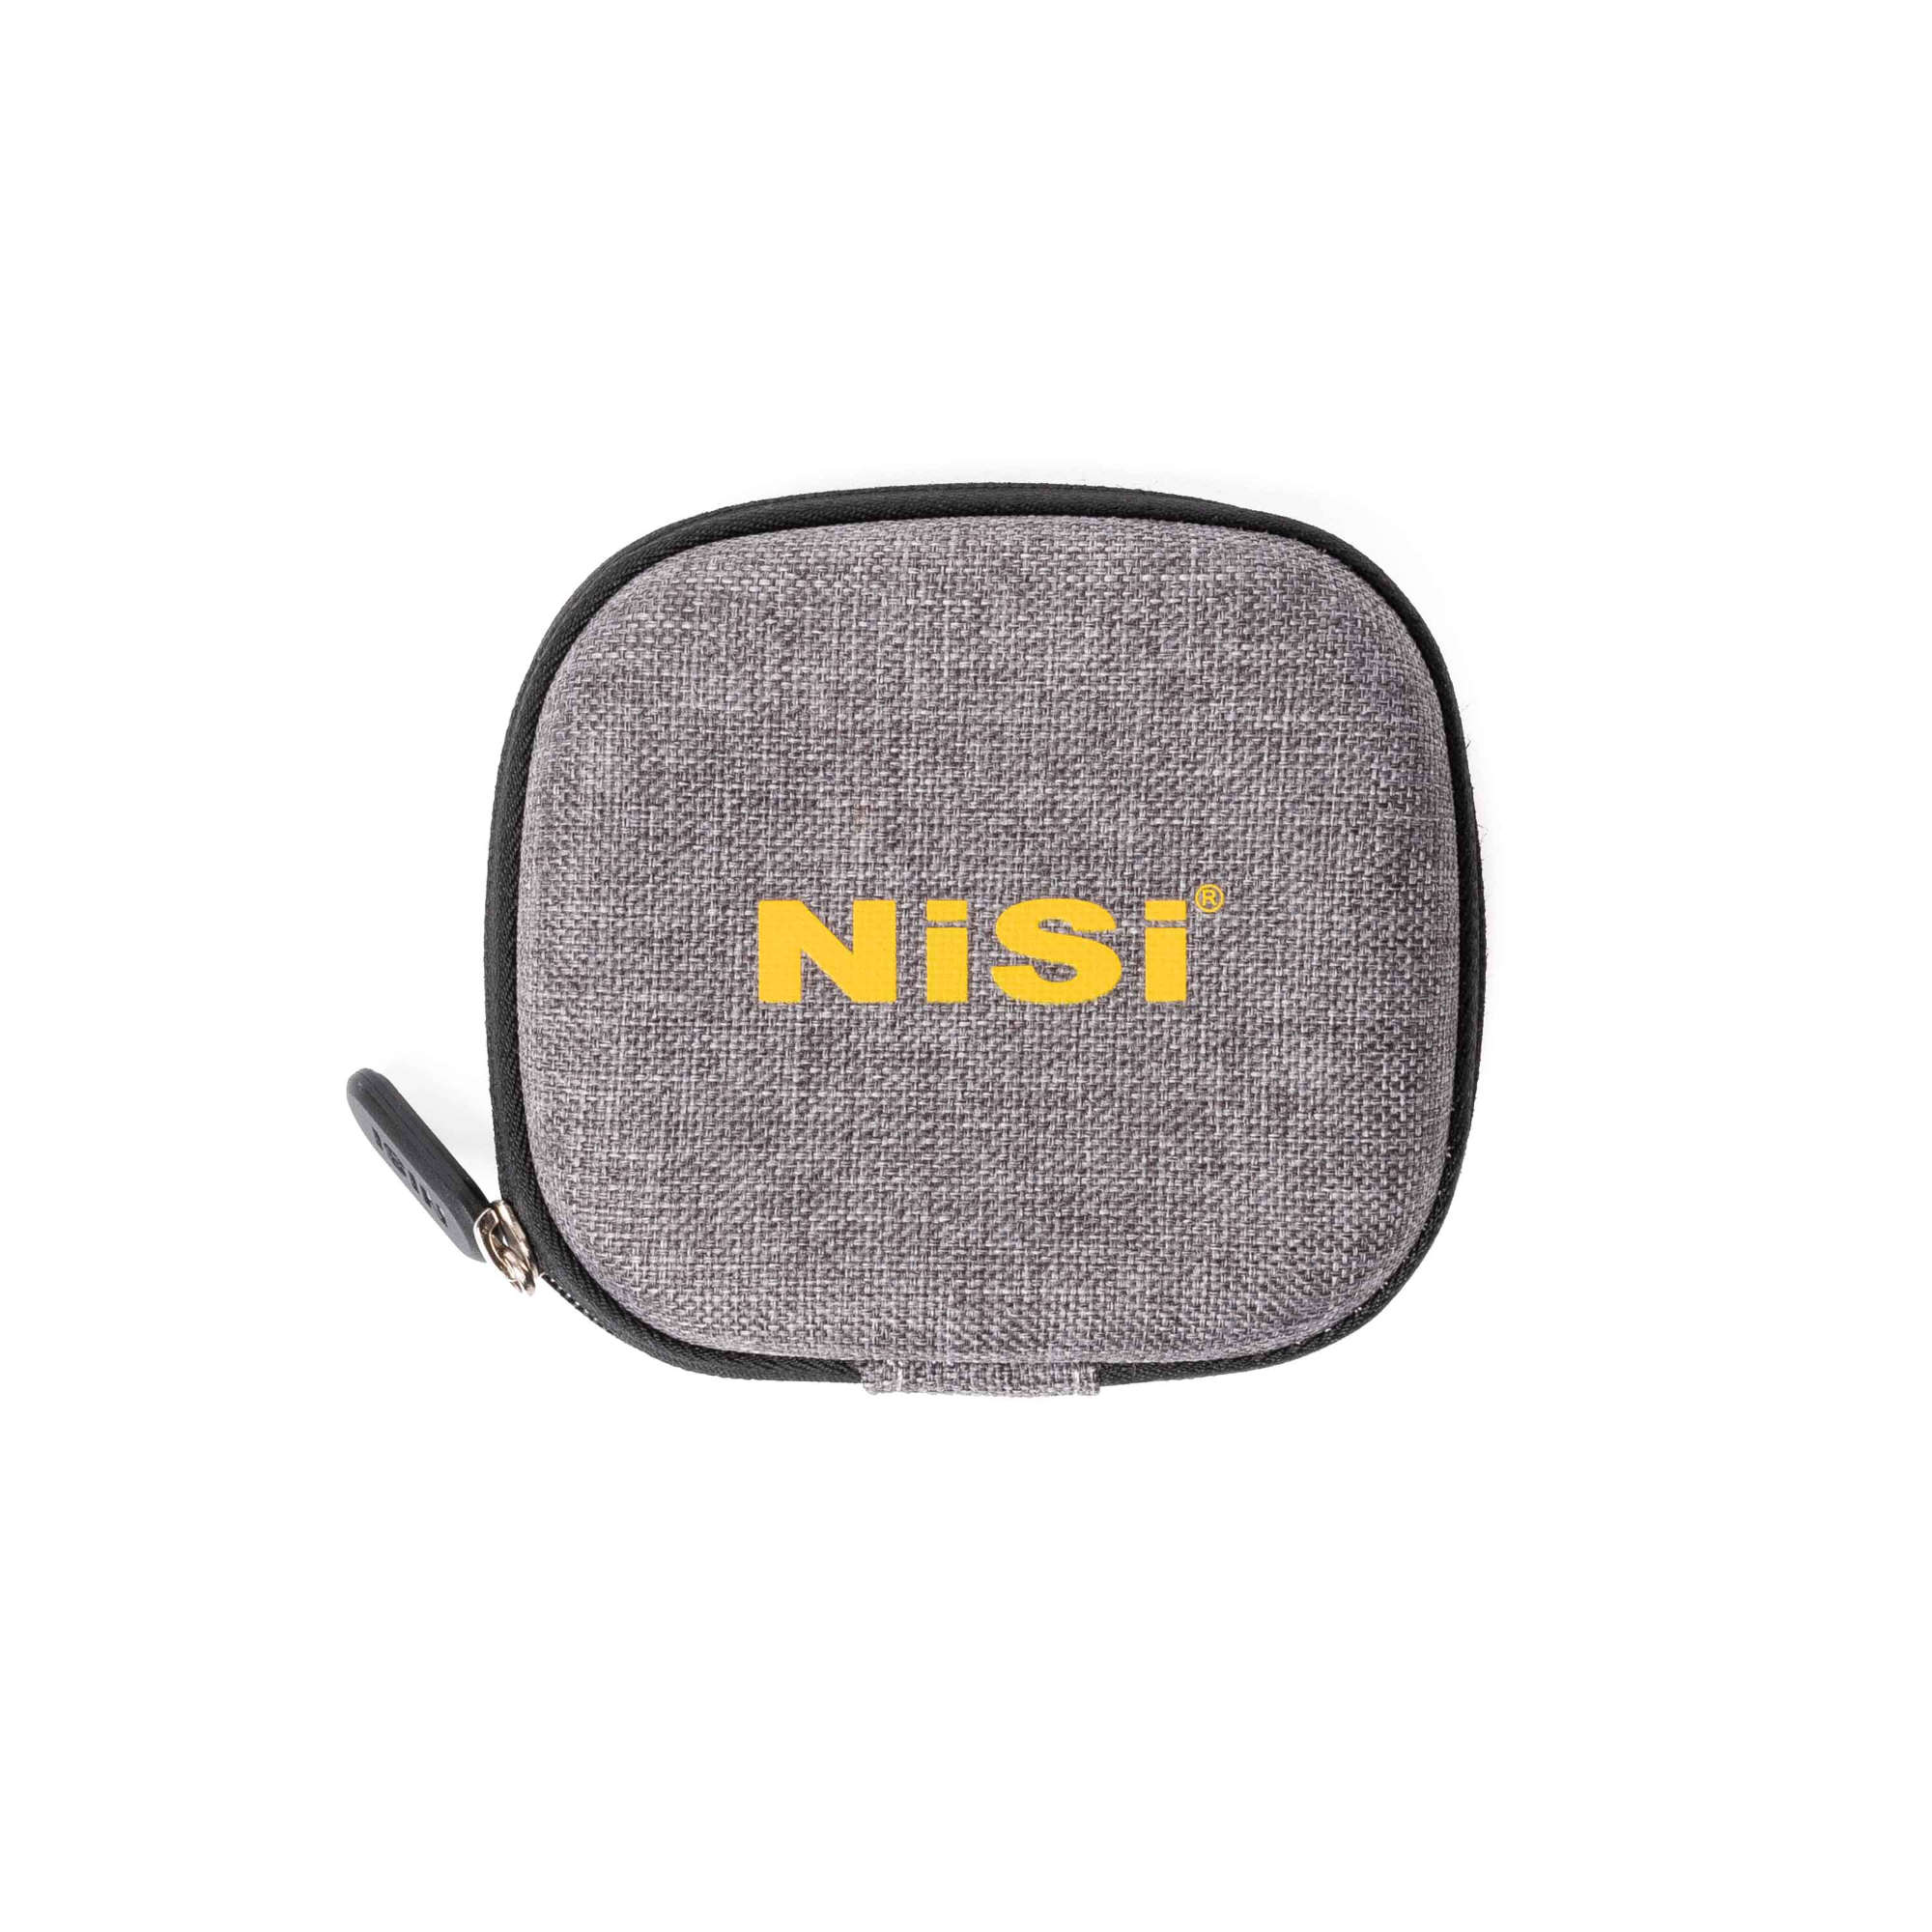 NiSi NISI-P1-KIT P1 Compact Filter Kit for Smartphones from Ikan 